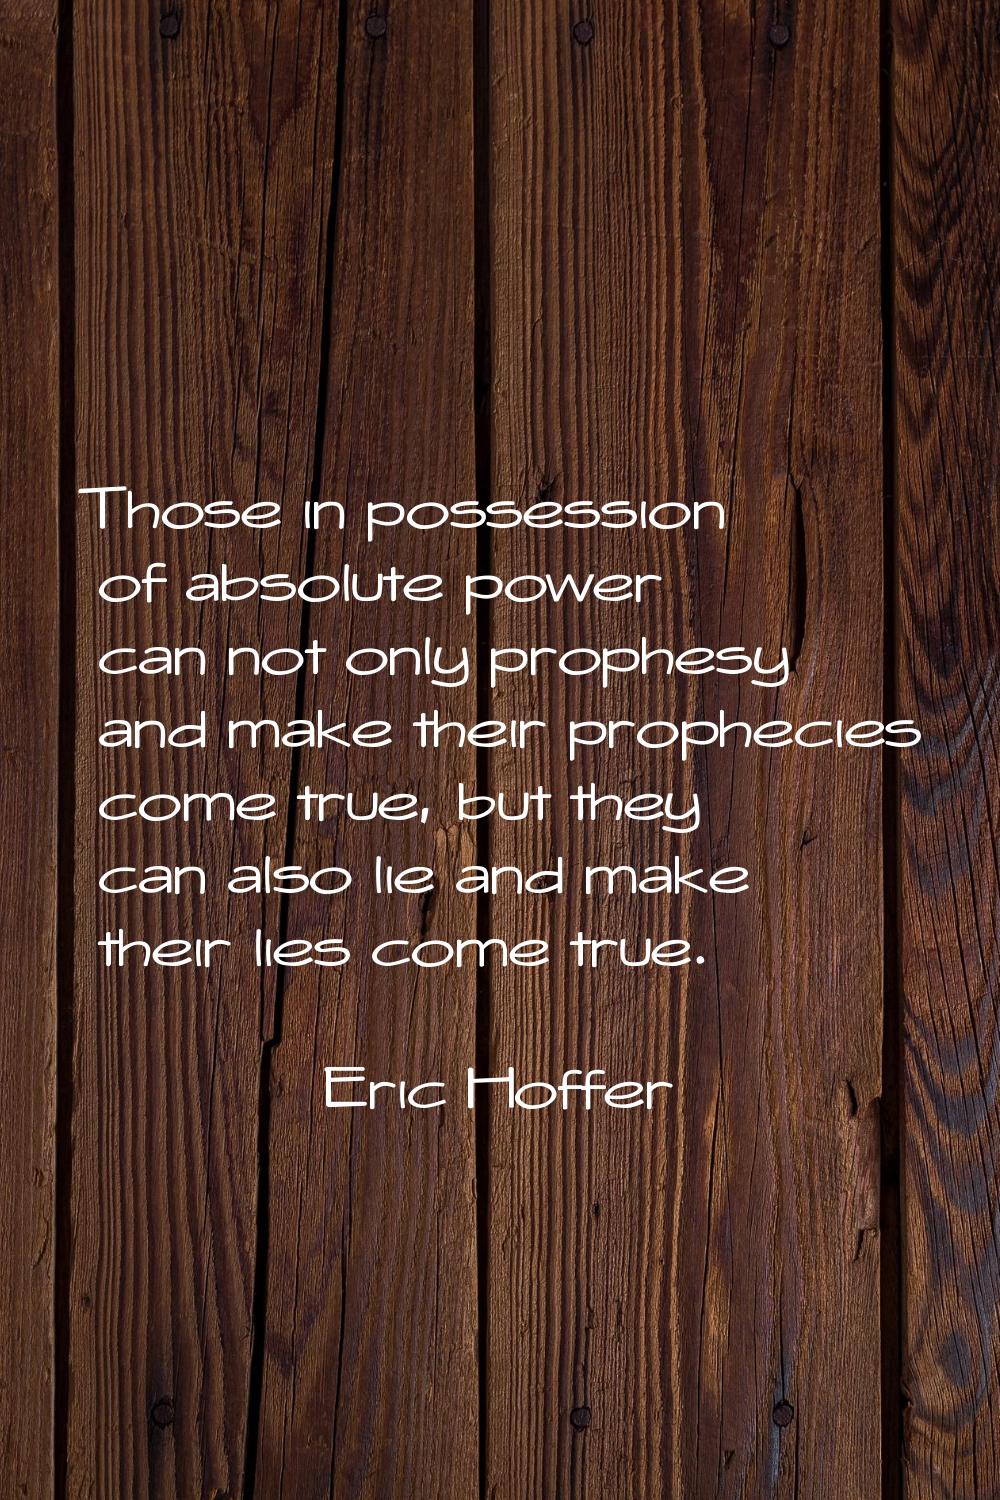 Those in possession of absolute power can not only prophesy and make their prophecies come true, bu